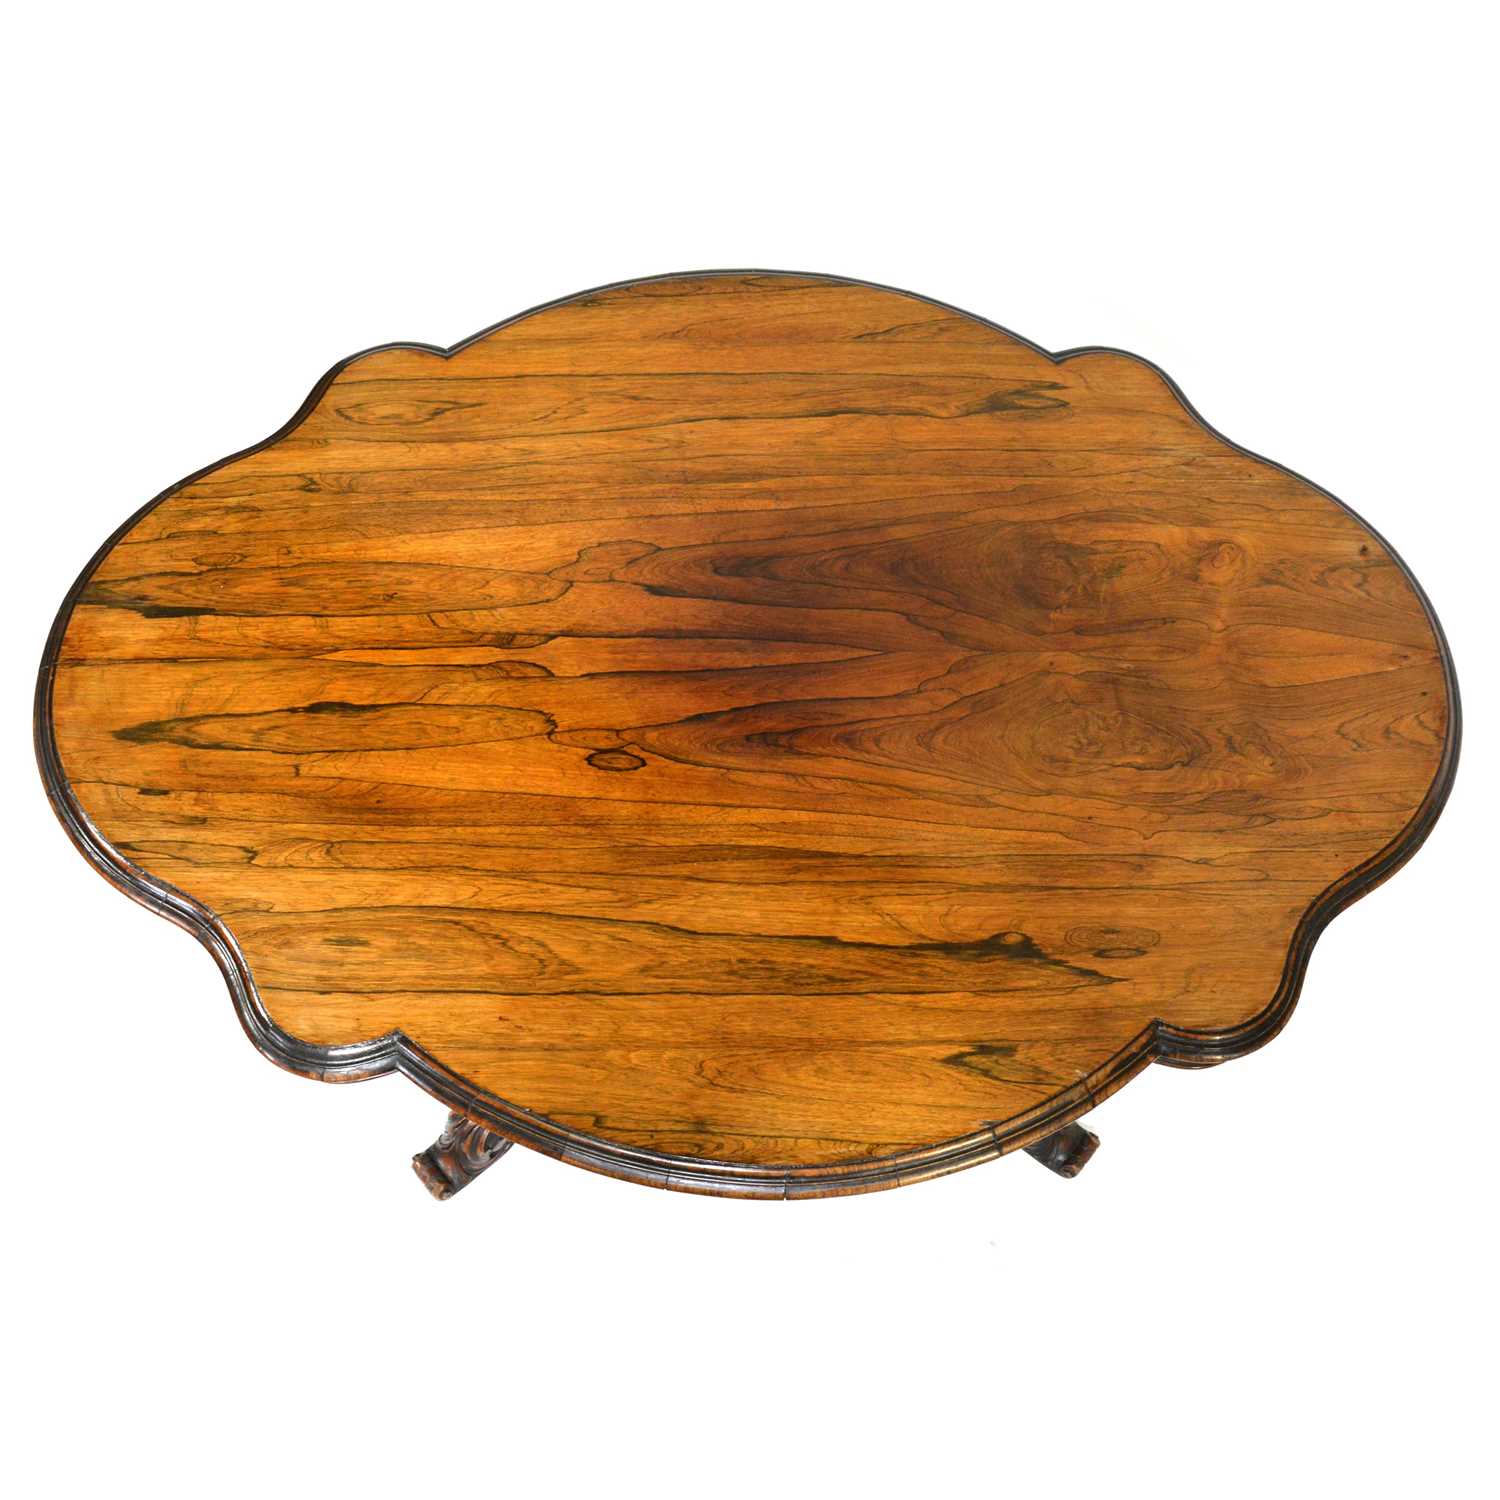 Victorian walnut and rosewood dining table, - Image 2 of 2